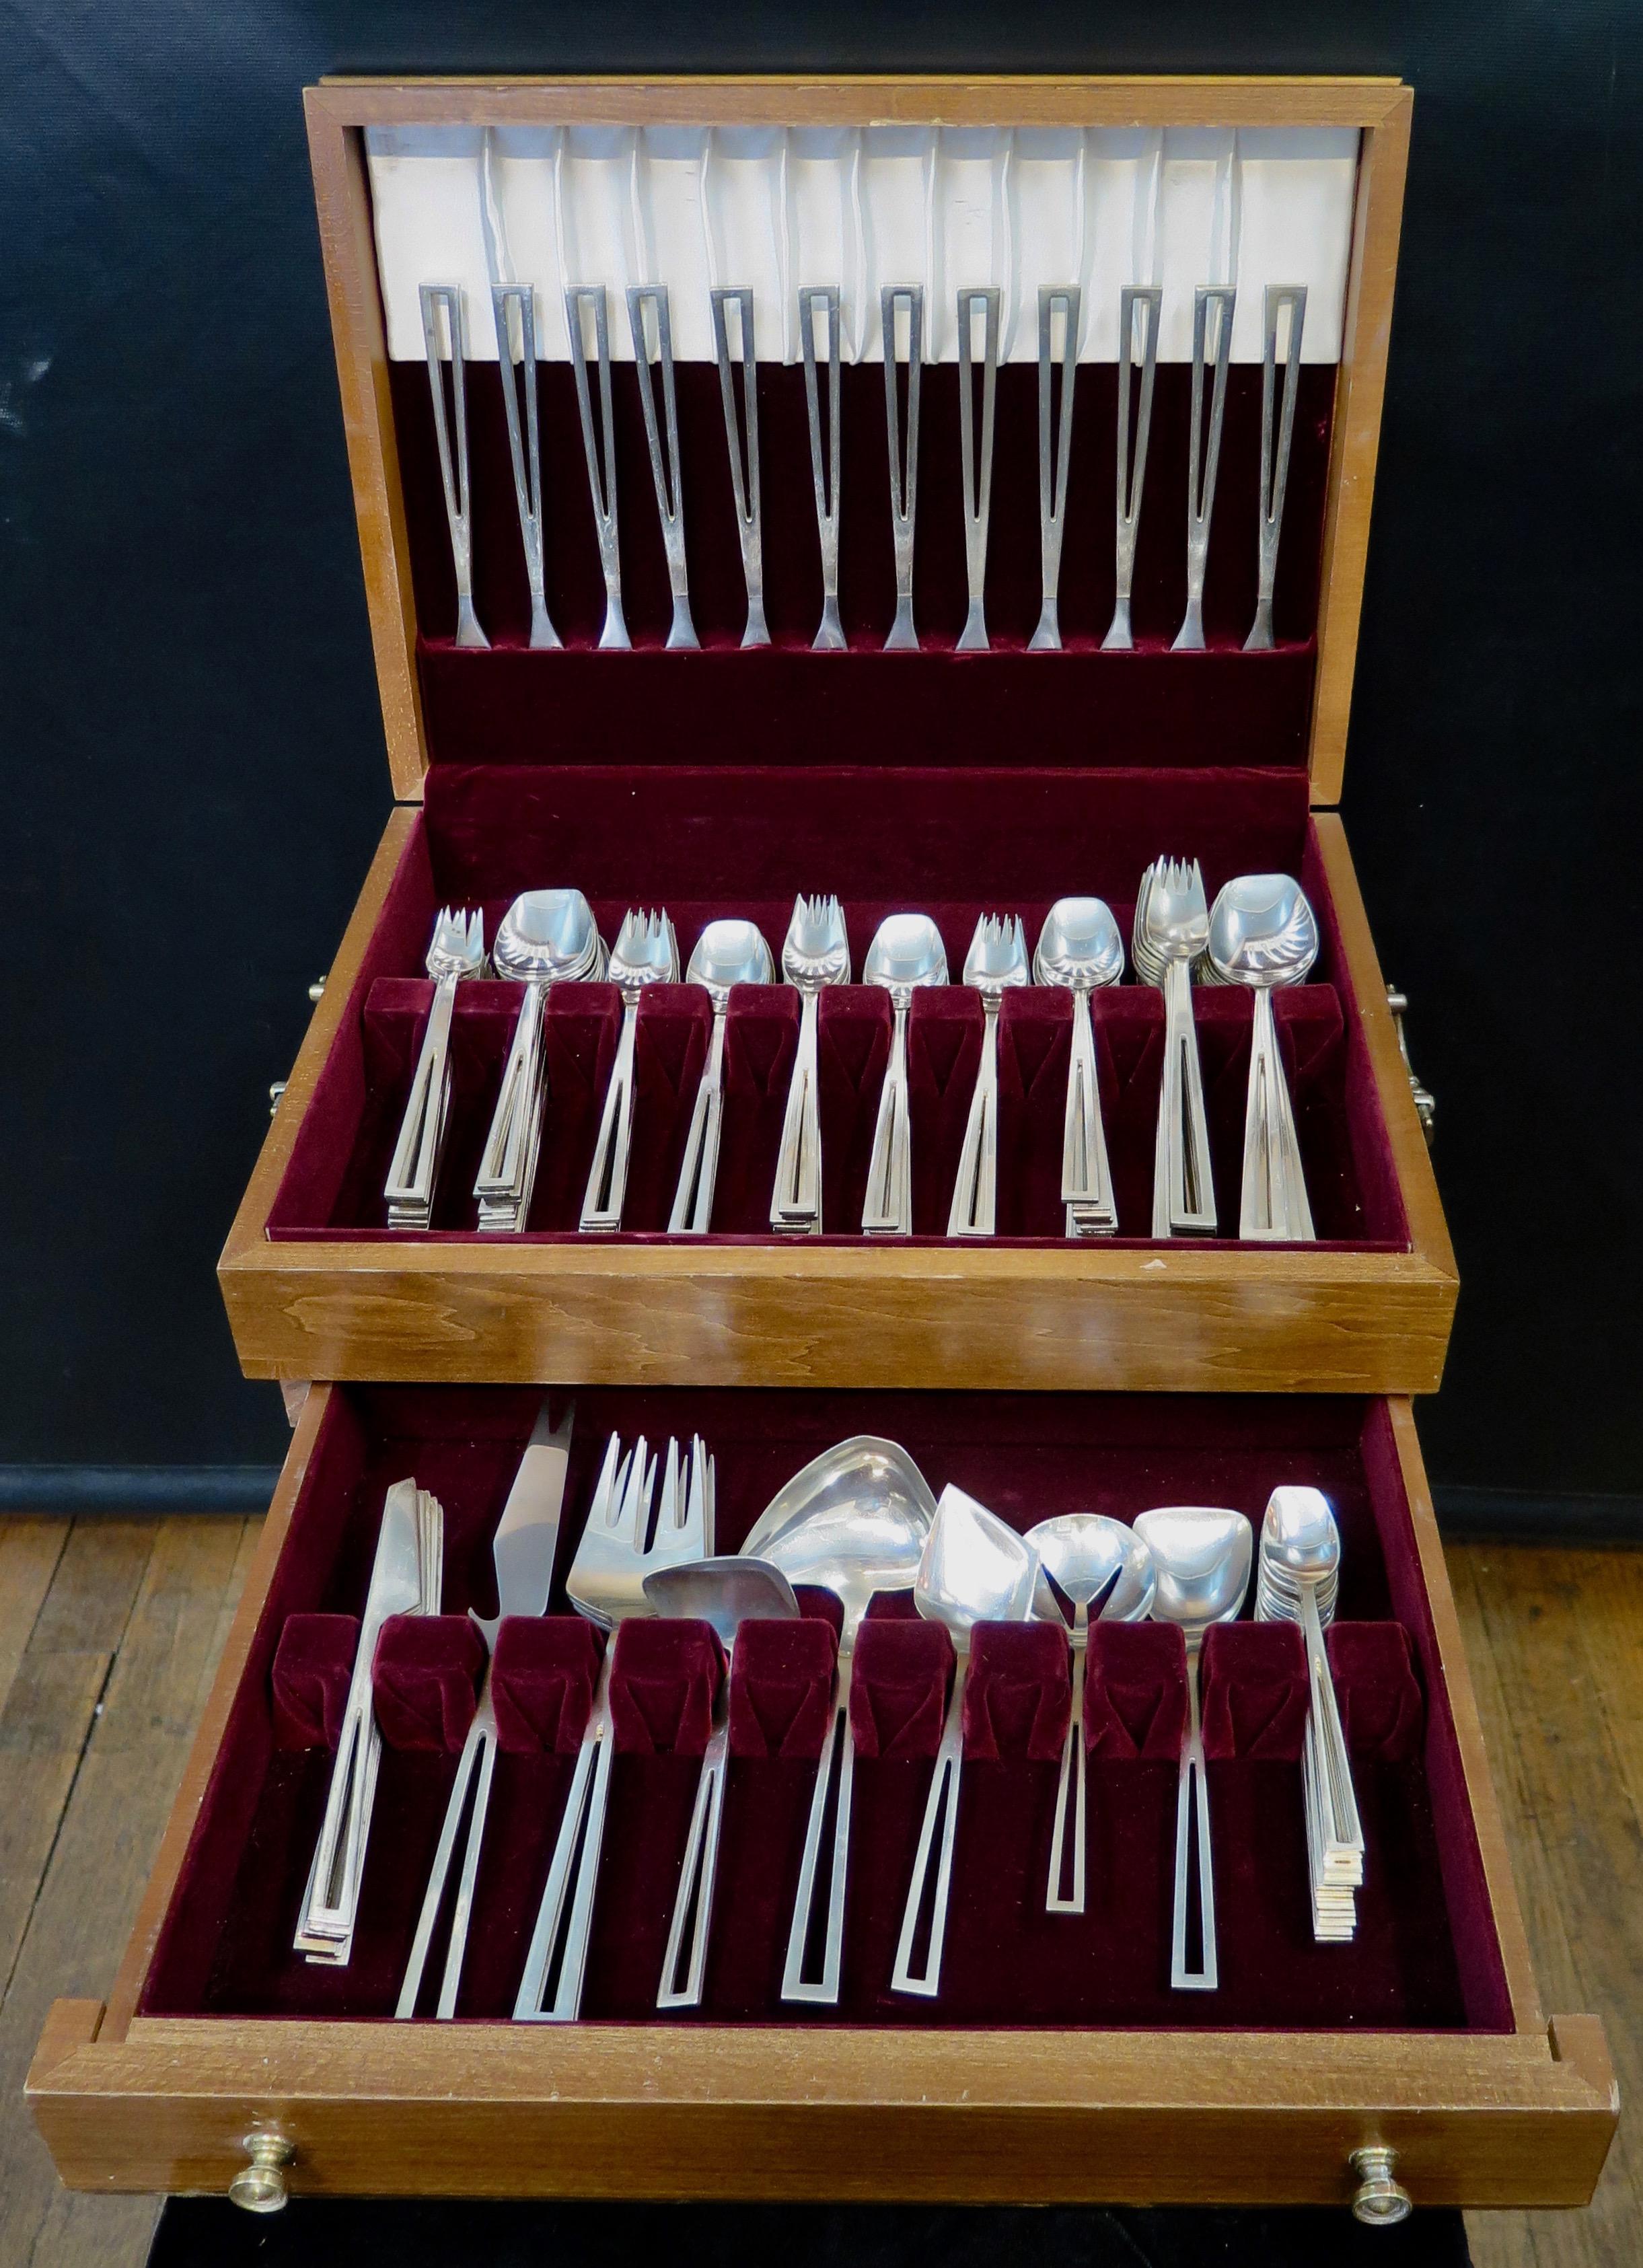 This vintage gleaming midcentury sterling silver flatware service is by the Mexican designer Celsa. The pattern, Avanti, has an impressive ultra-modern look that became very popular in New York after its production, circa 1955. Each piece of